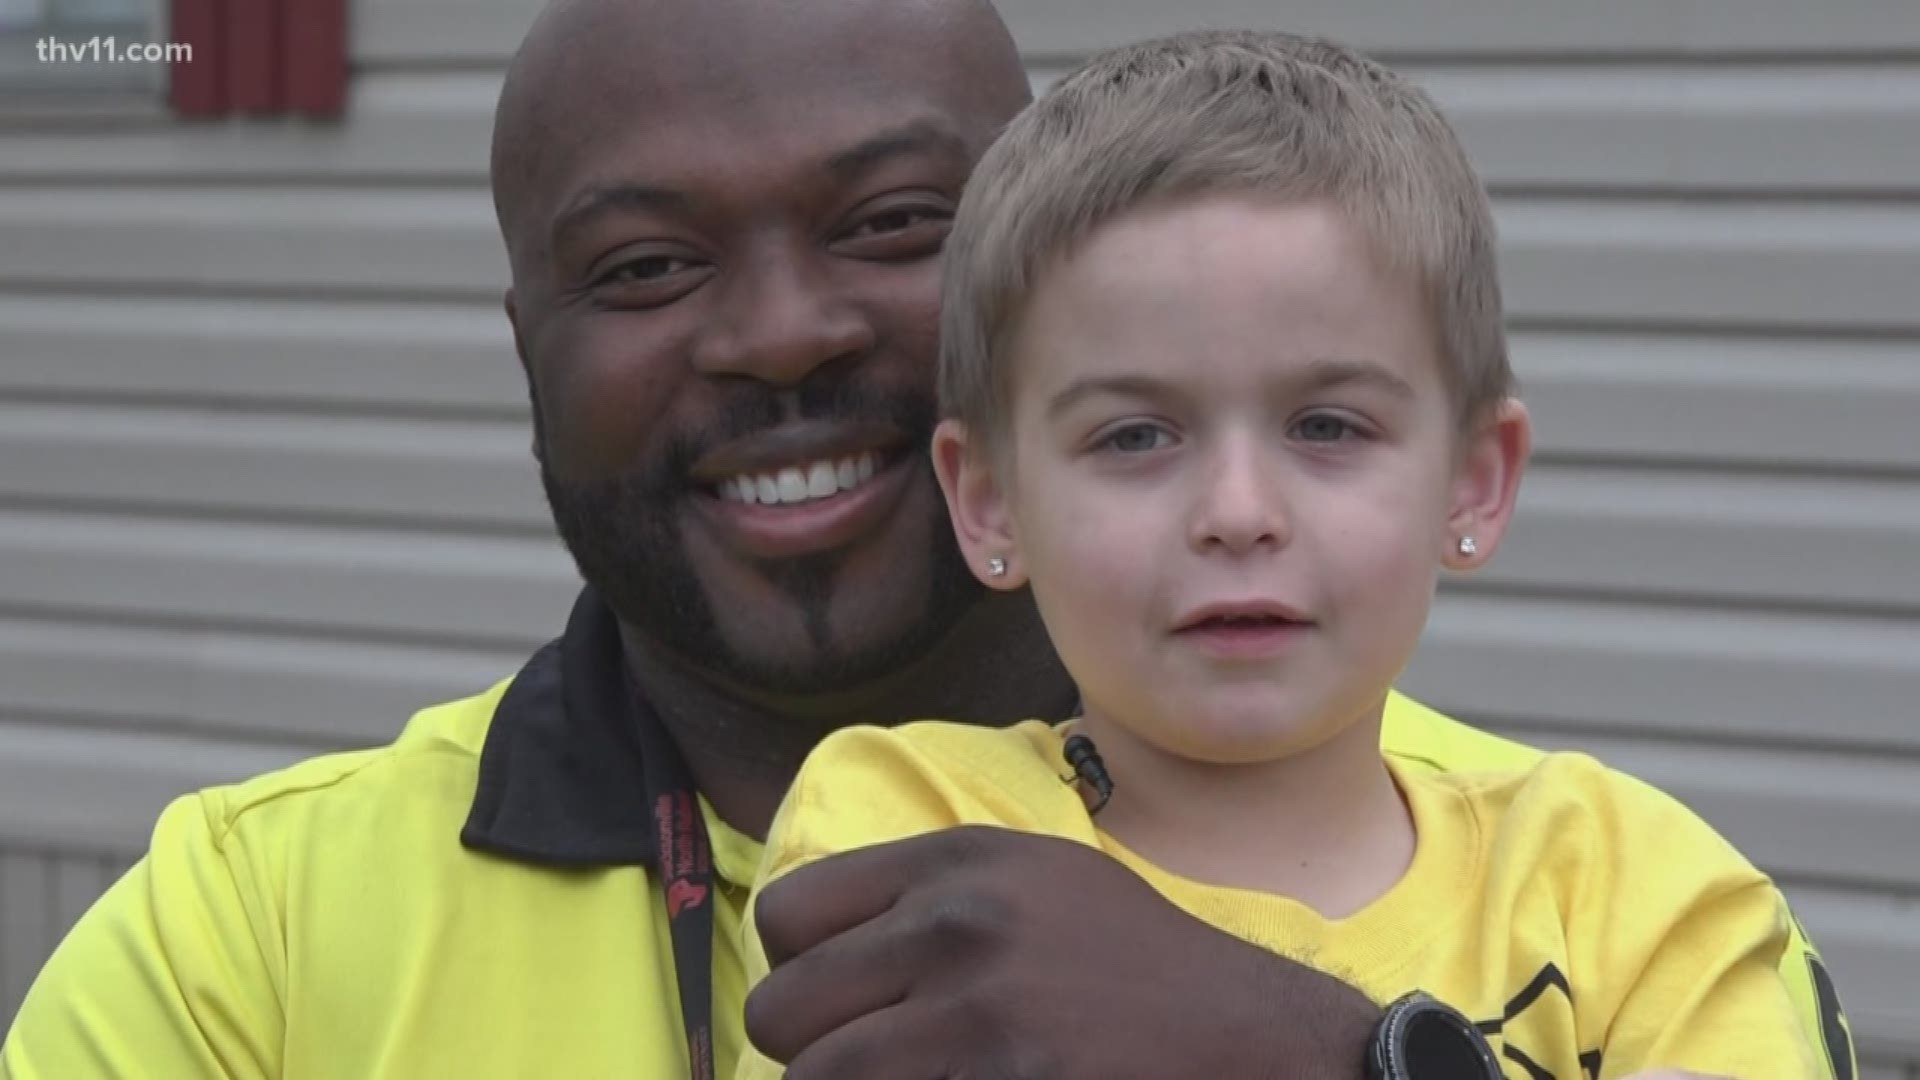 5-year-old Easton wanted to dress as his school security officer Jefferey Cross because he says “he keeps me safe.”